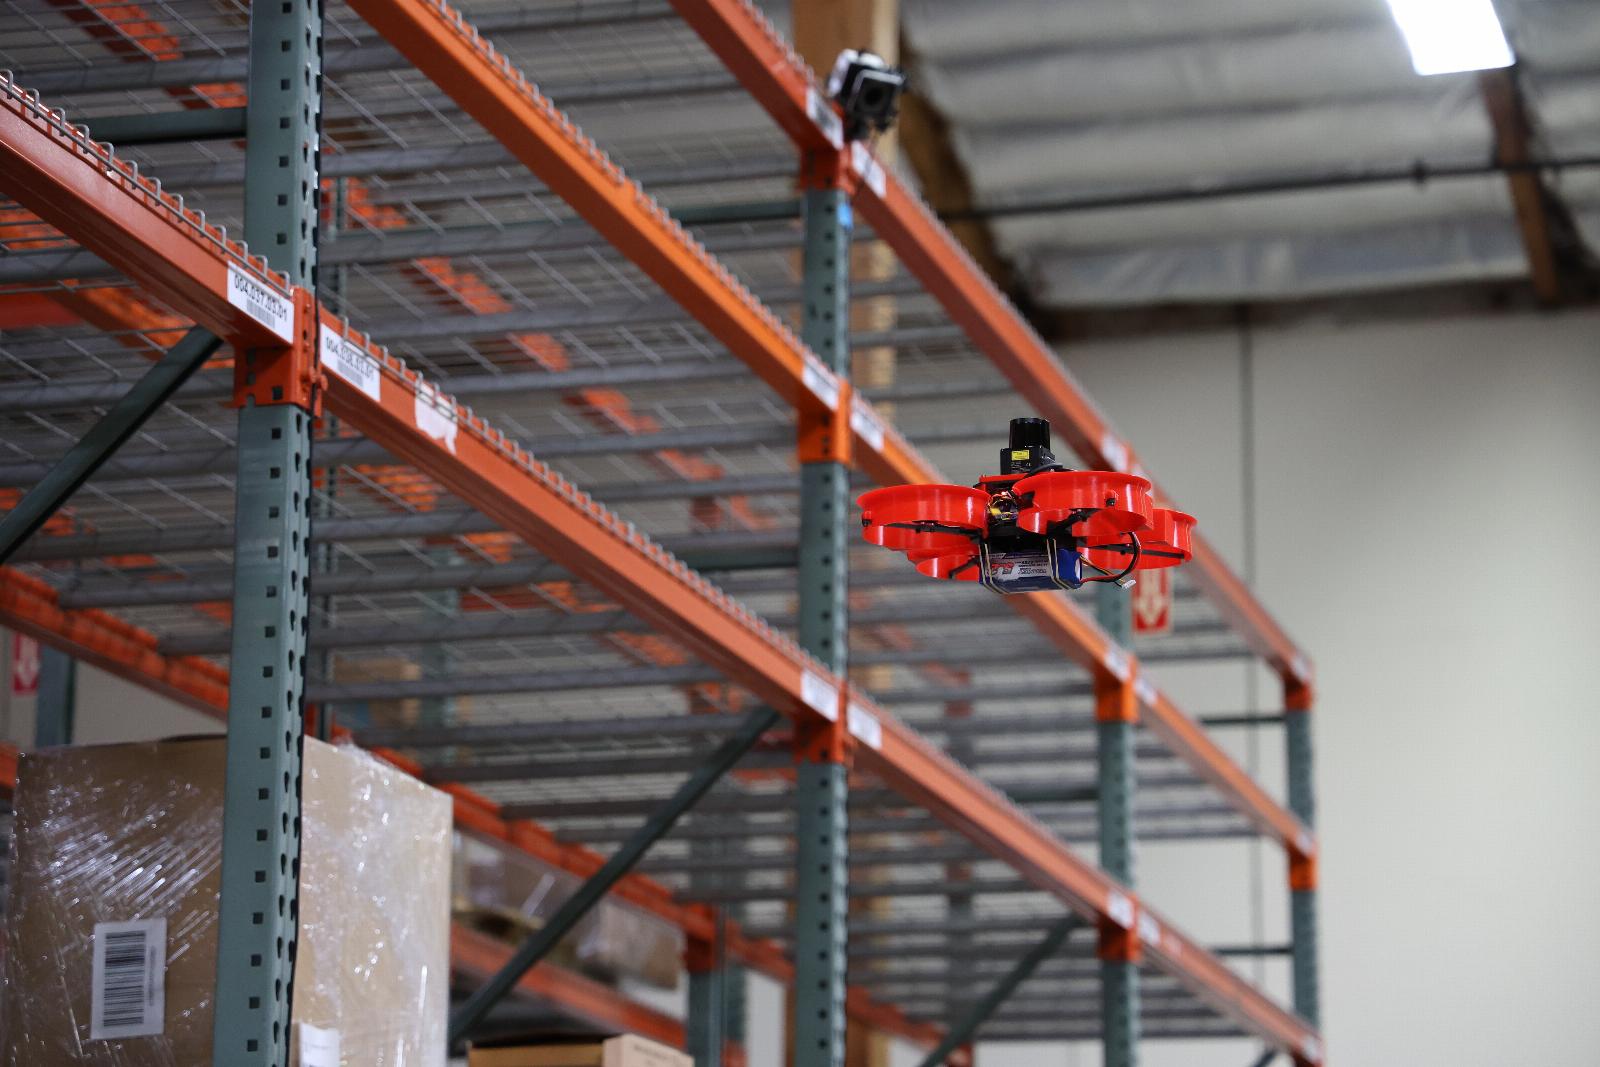 B Garage raises $20M for its warehouse inventory drones 